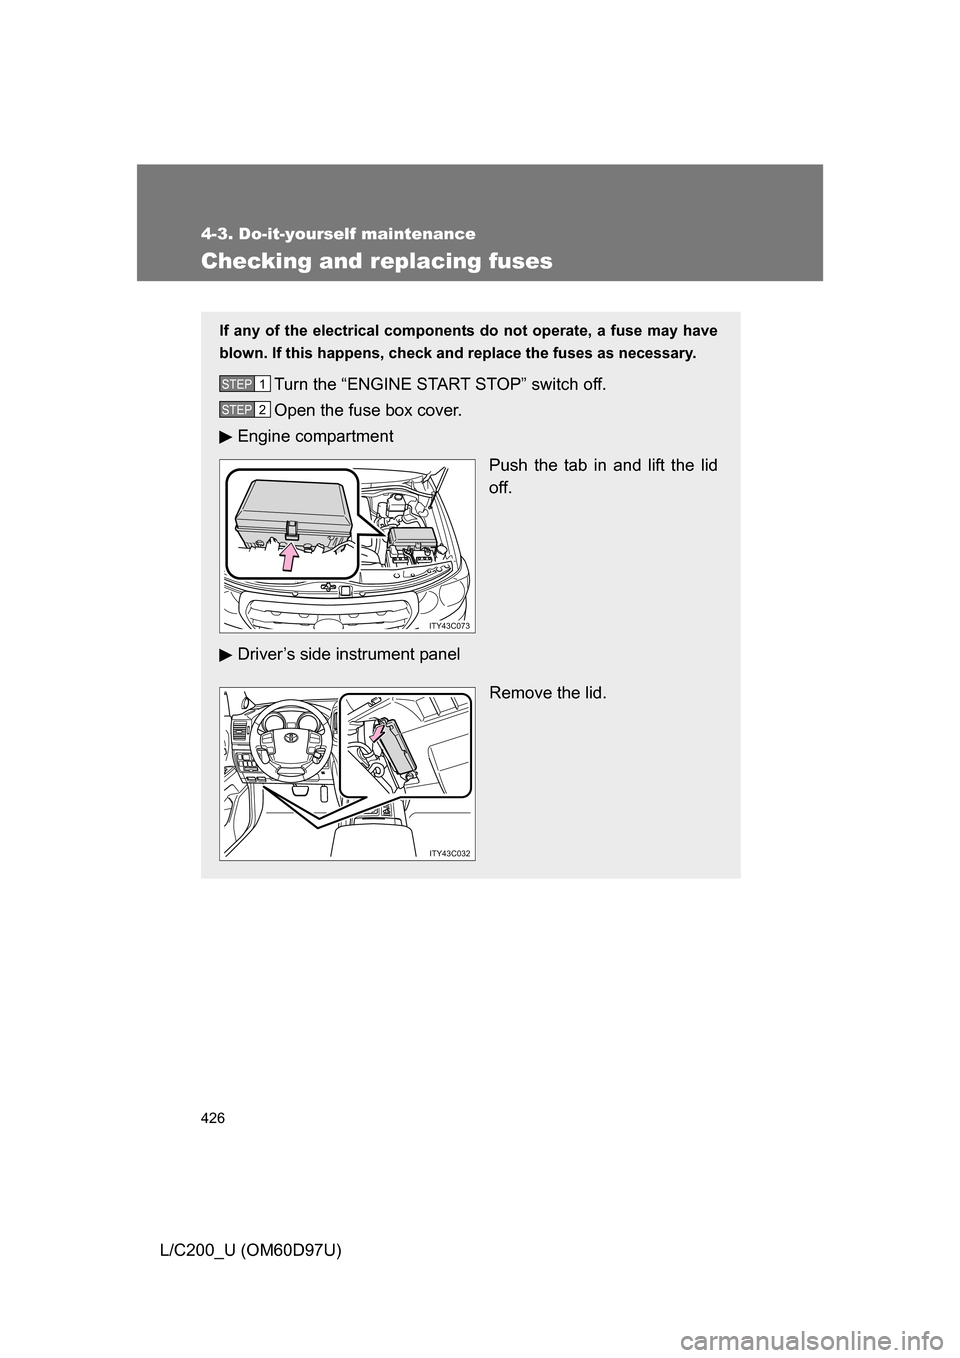 TOYOTA LAND CRUISER 2009 J200 Owners Guide 426
4-3. Do-it-yourself maintenance
L/C200_U (OM60D97U)
Checking and replacing fuses
If any of the electrical components do not operate, a fuse may have
blown. If this happens, check and replace the f